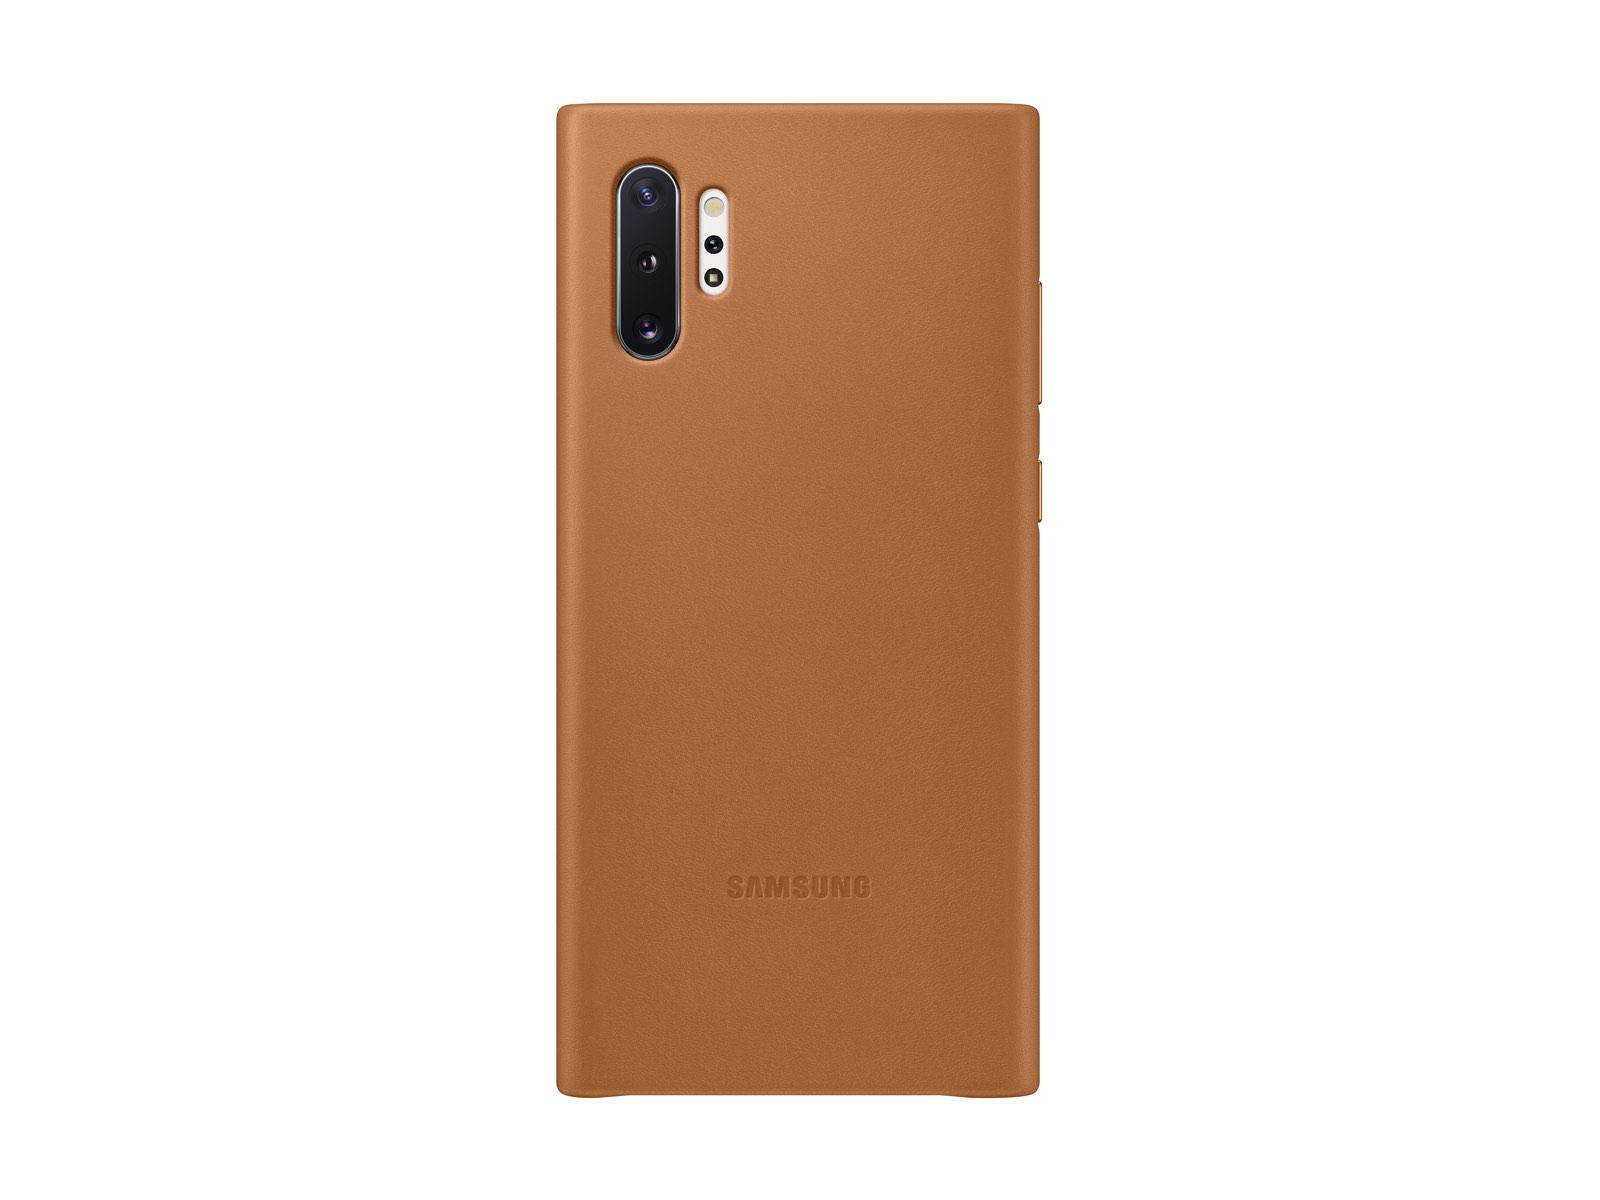 Galaxy Note10+ Leather Back Cover, Accessories - | Samsung US